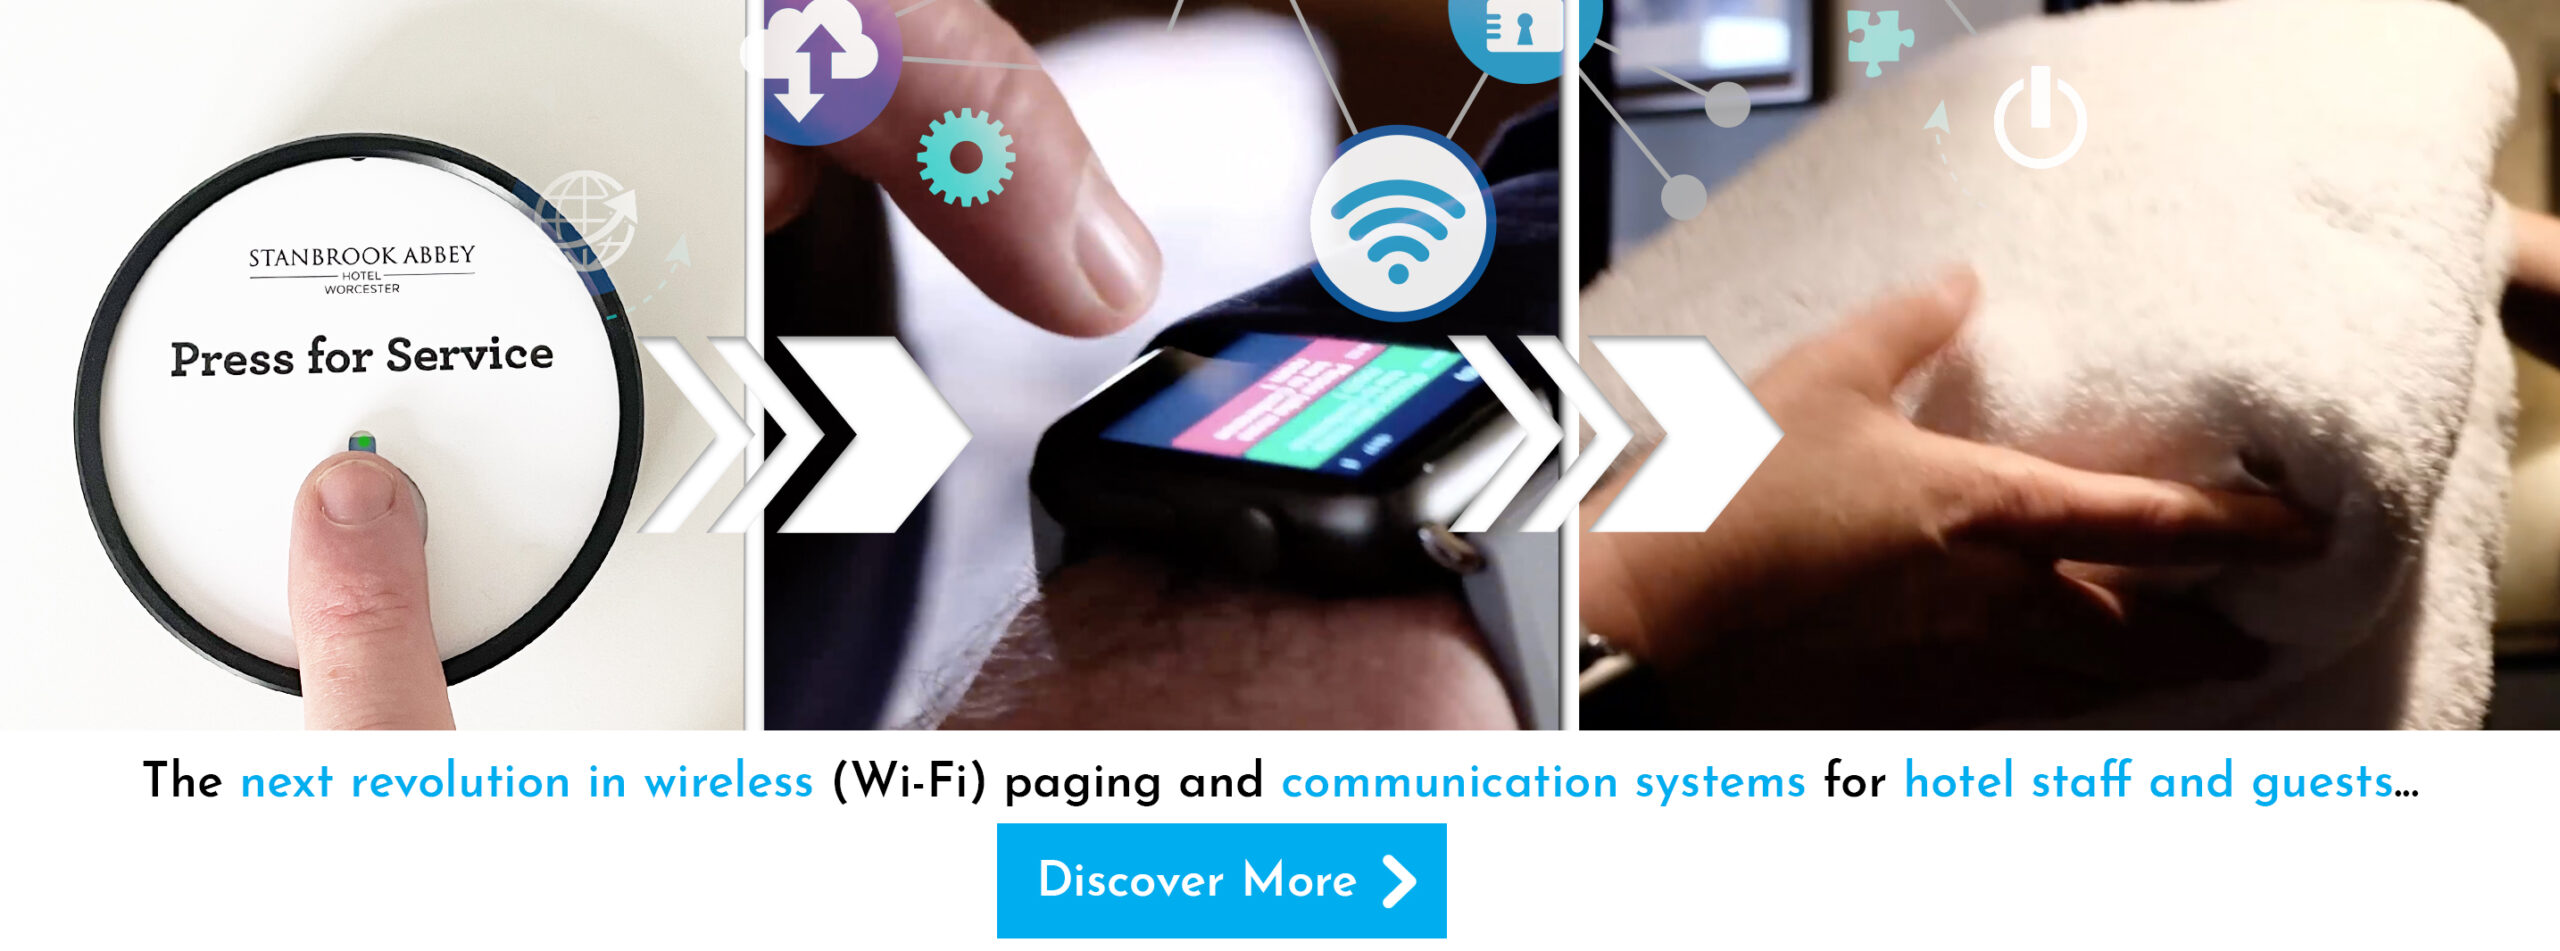 The next revolution in wireless (Wi-Fi) paging and communication systems for hotel staff and guests